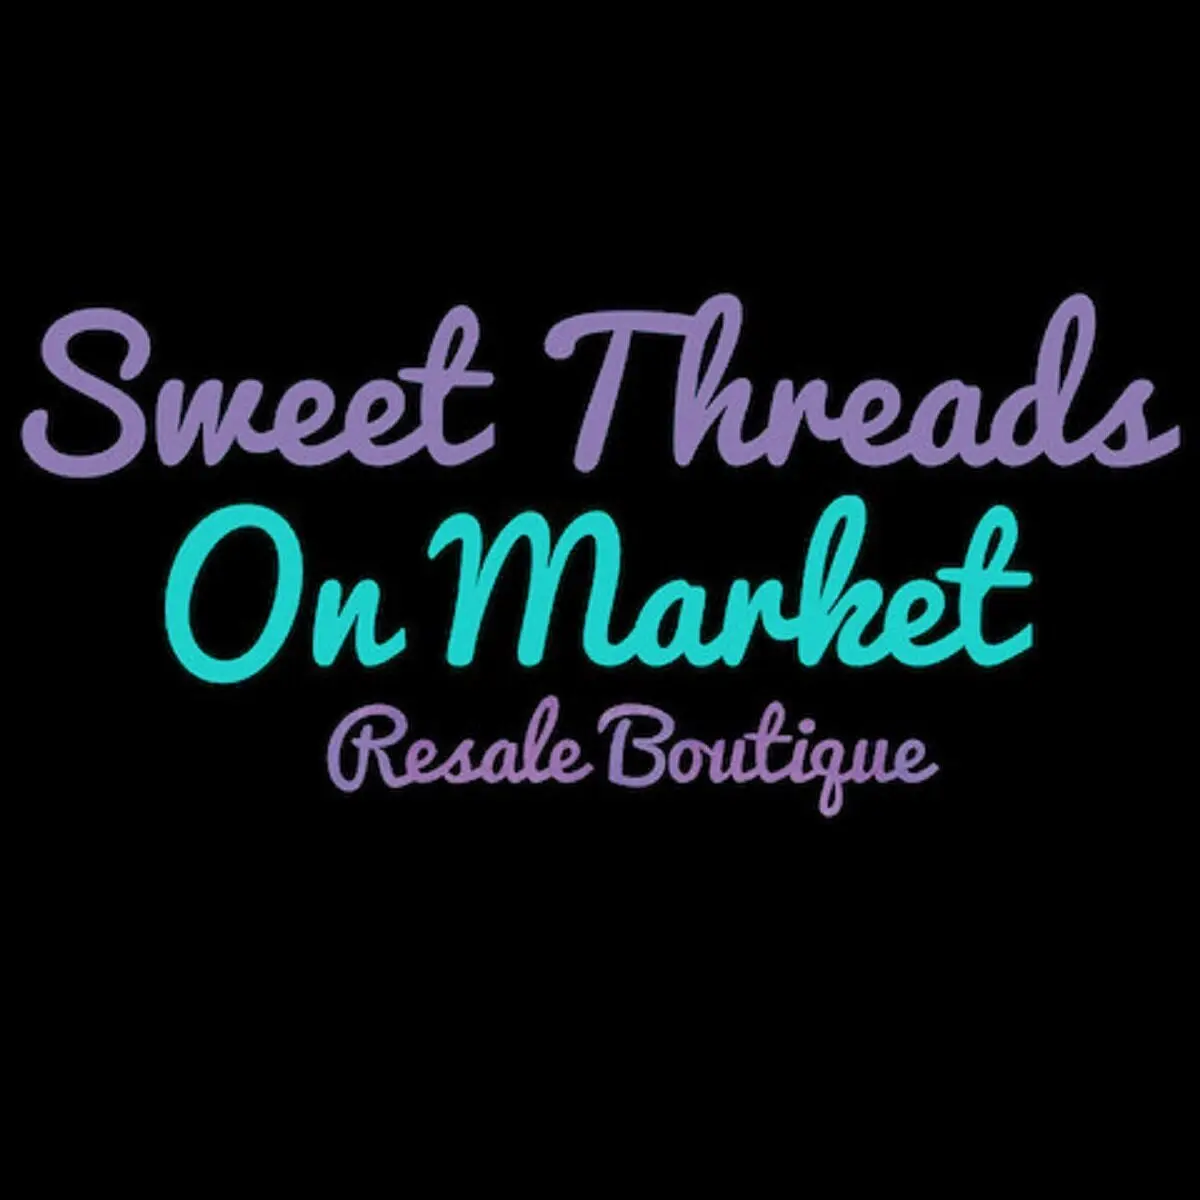 Sweet Threads On Market Resale Boutique